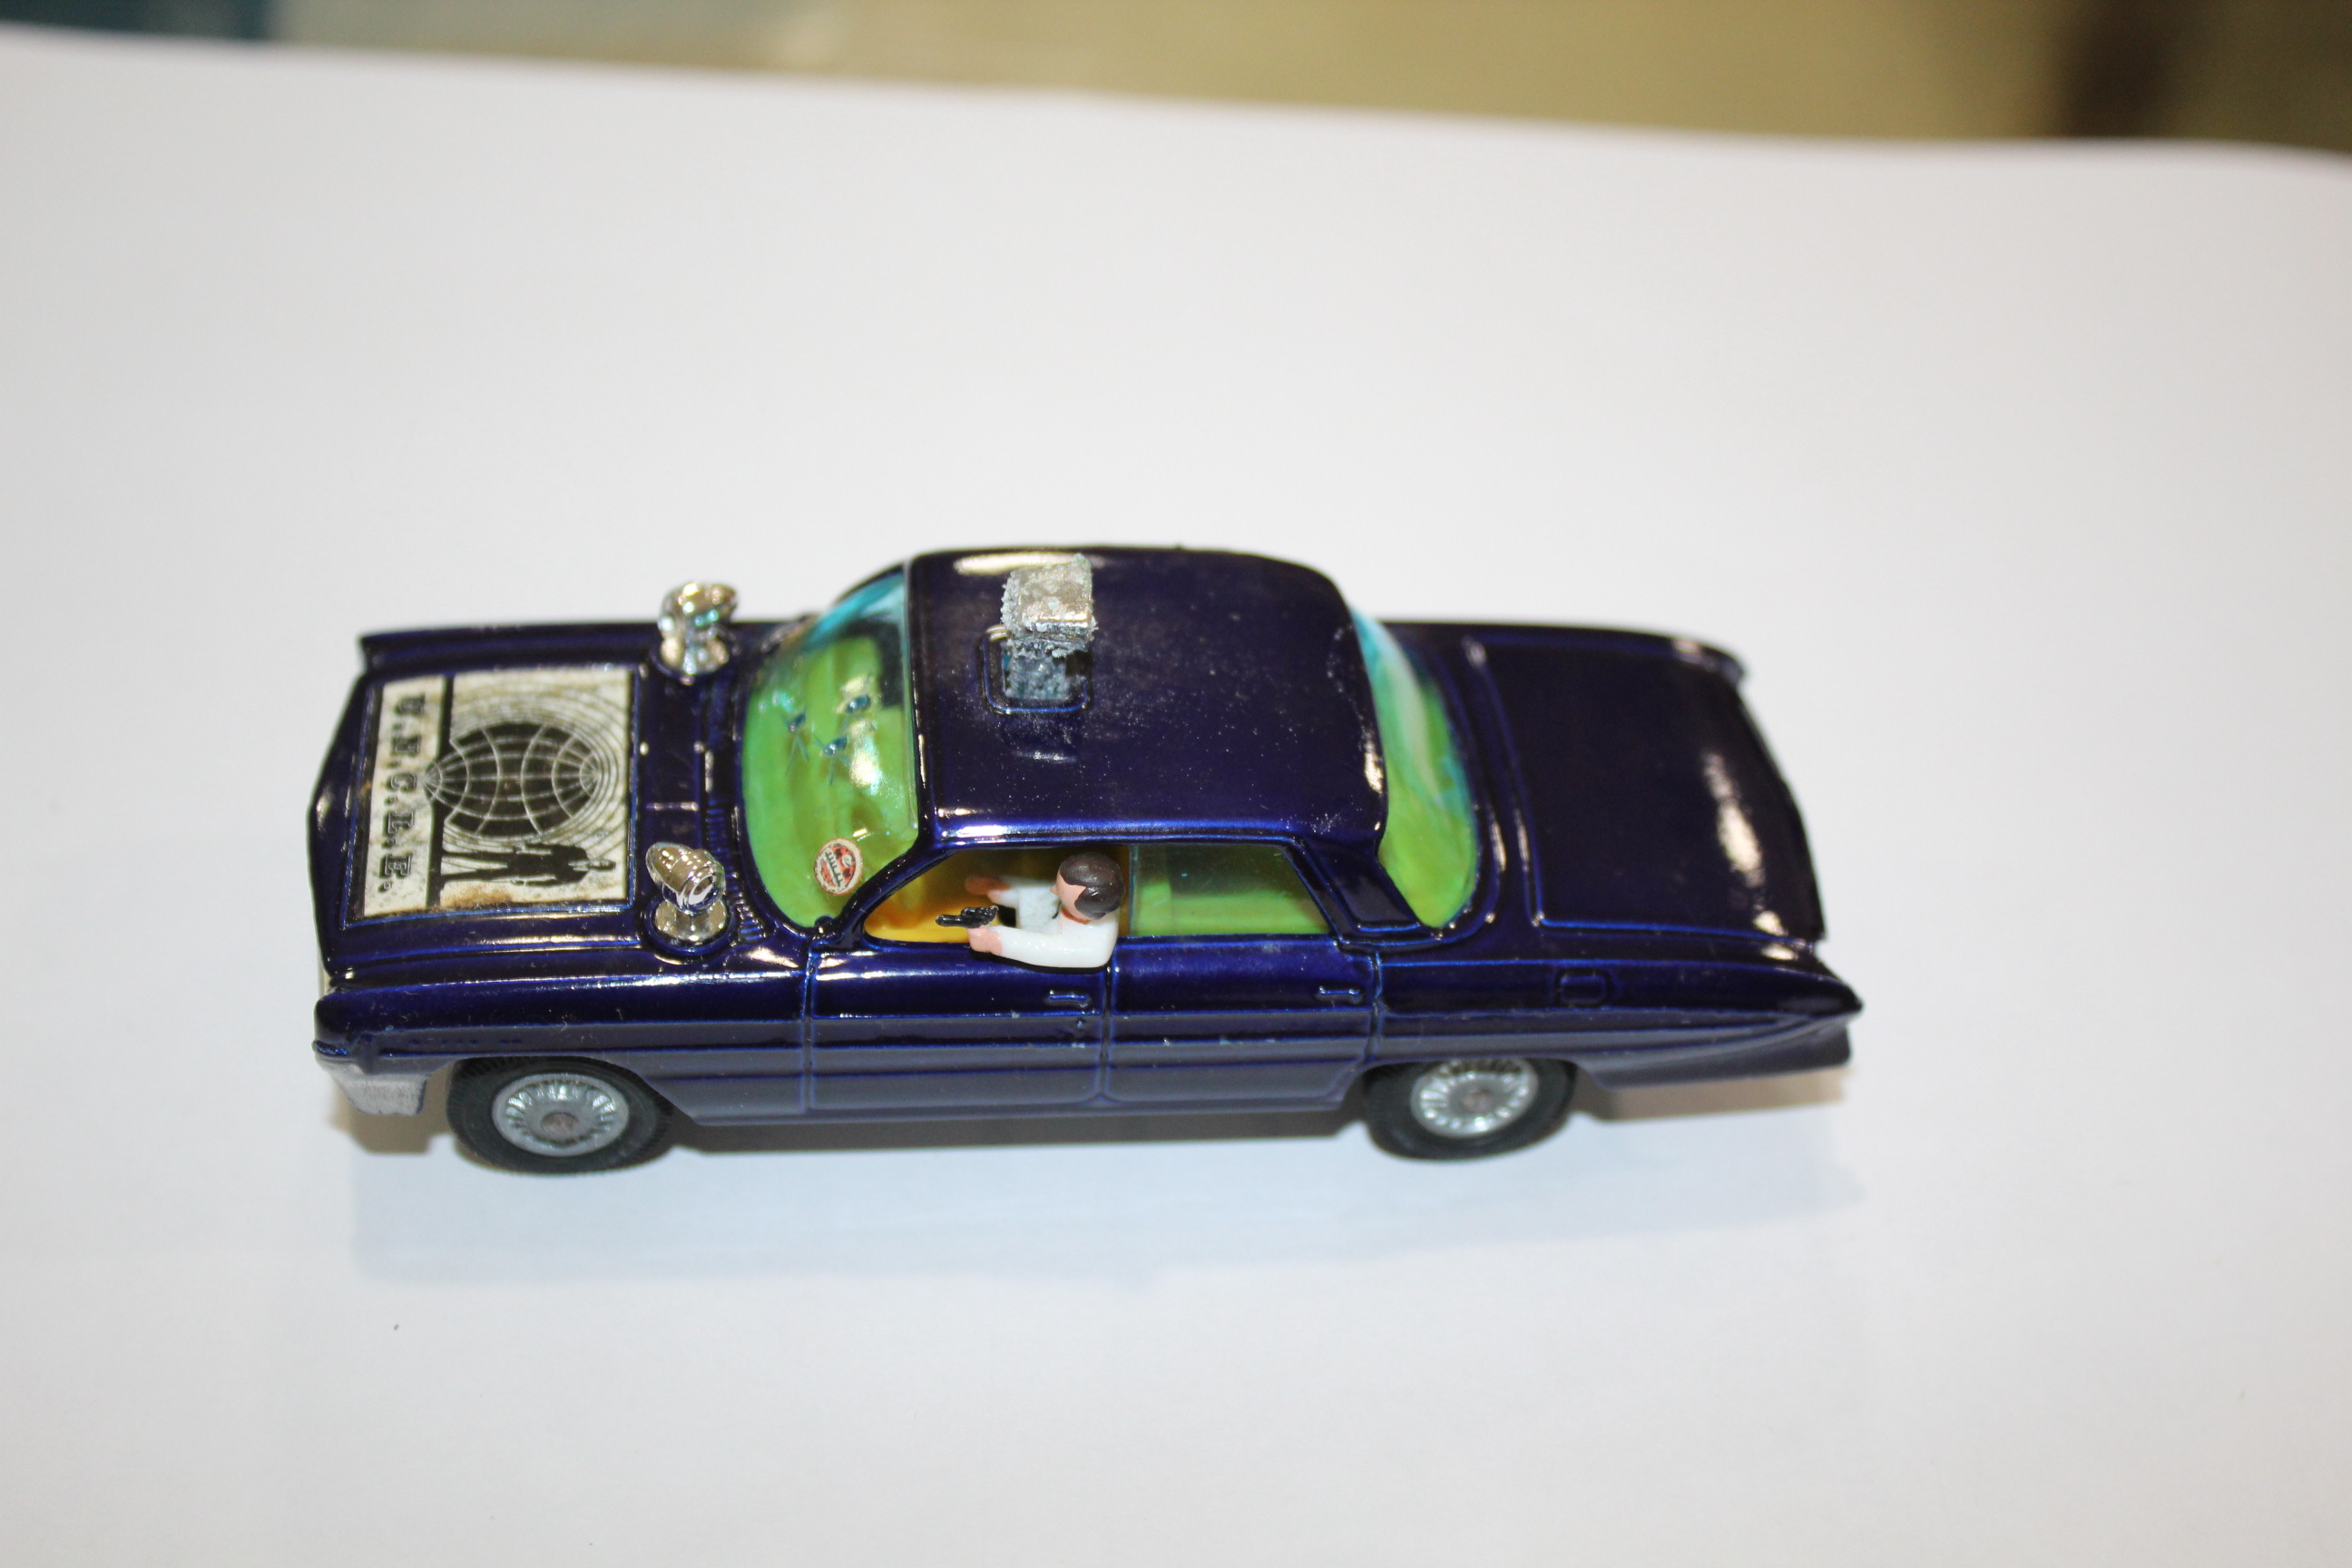 CORGI MAN FROM UNCLE THRUSH BUSTER Model No 497, the car with a purple body and 2 figures, and - Image 8 of 12